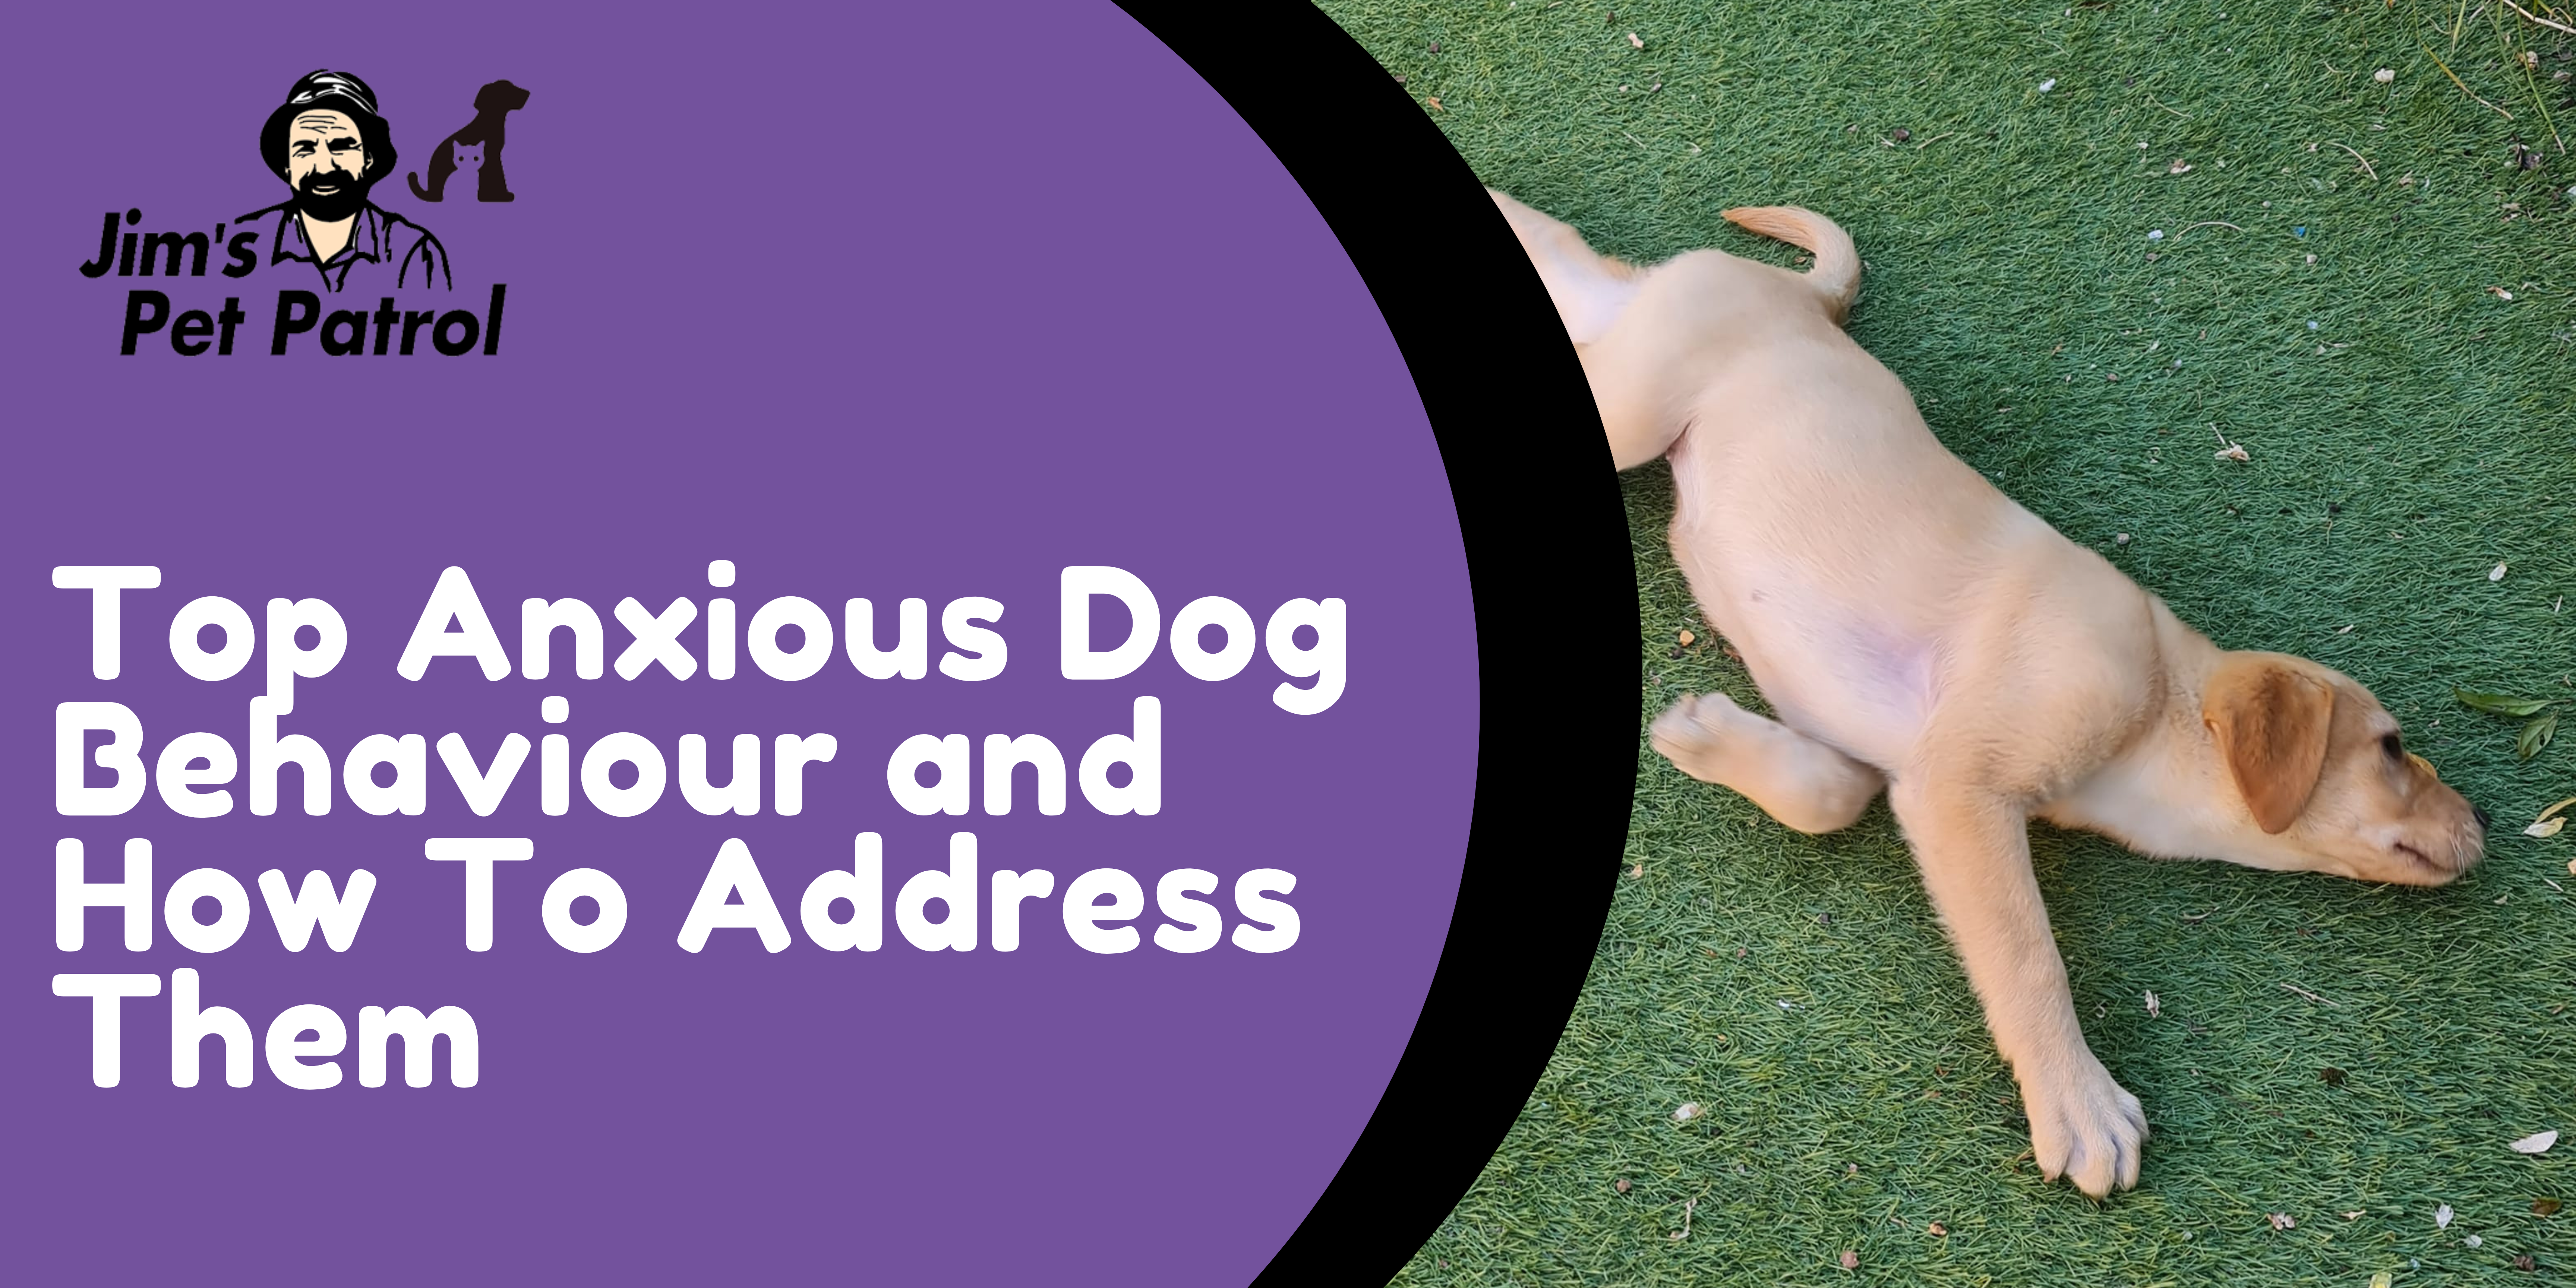 Top Anxious Dog Behaviour and How To Address Them